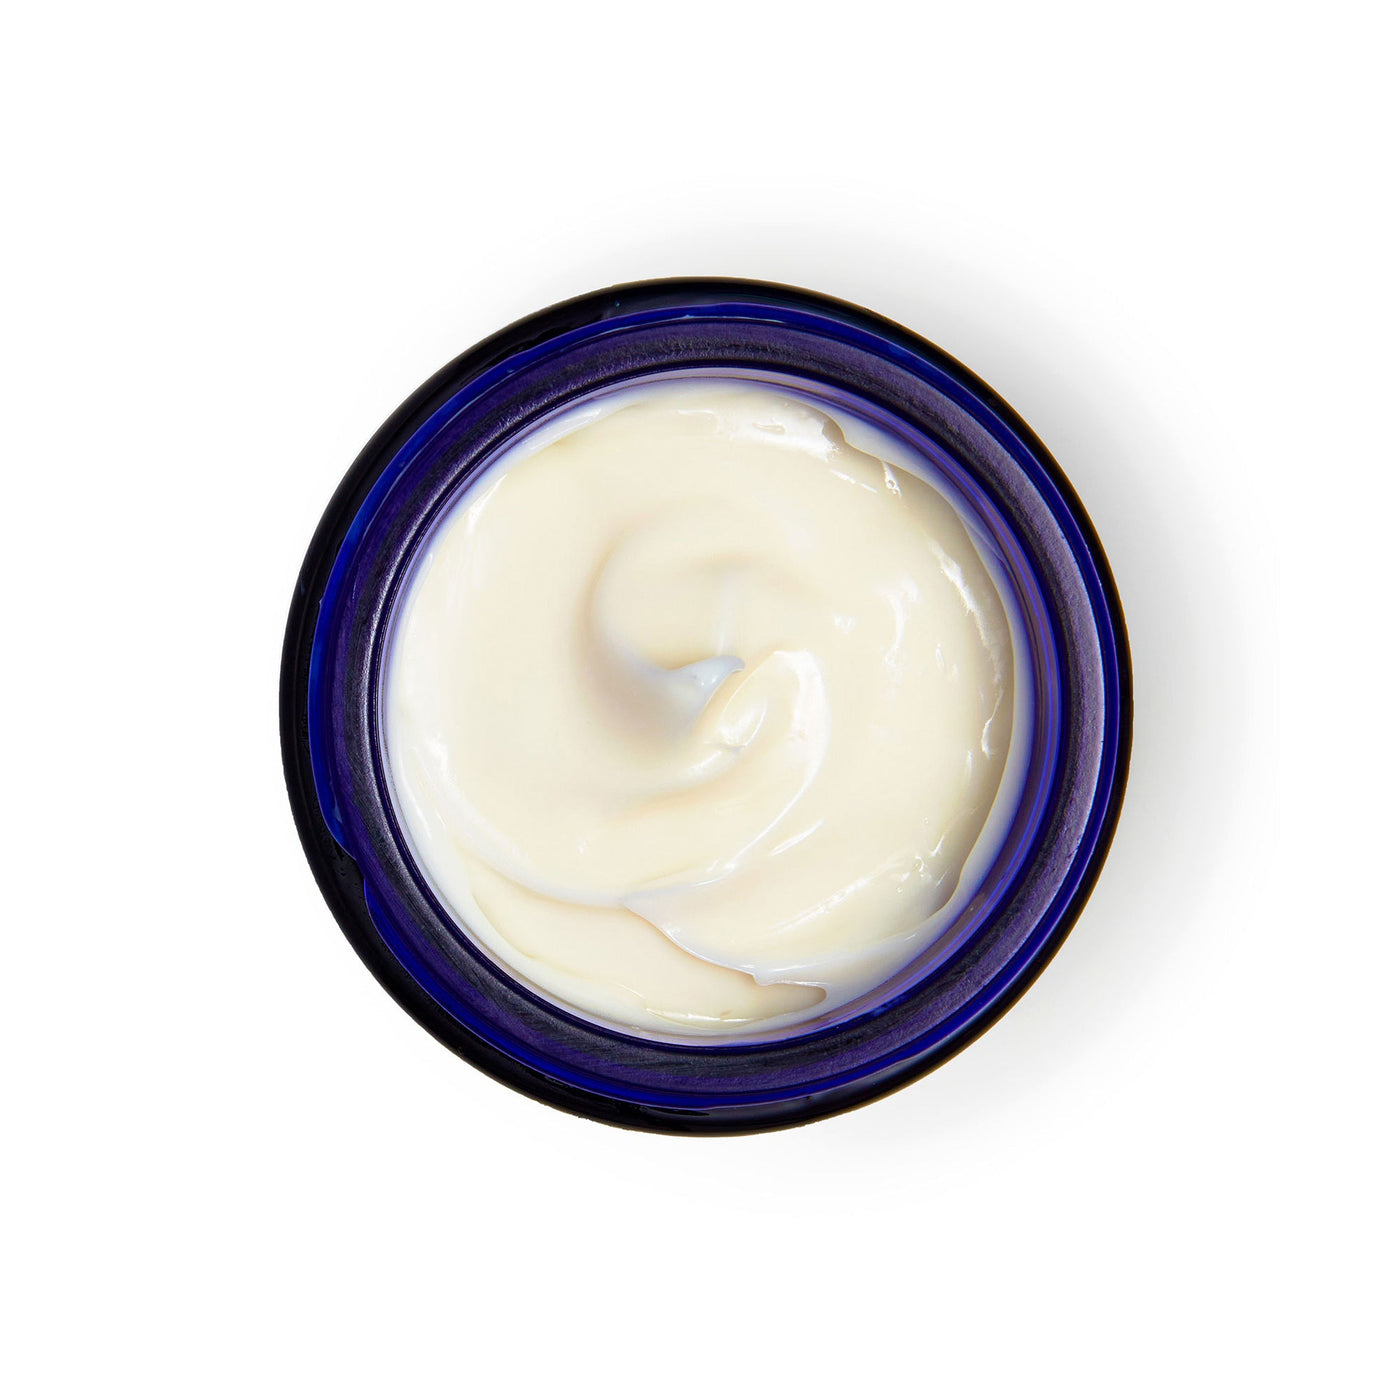 frankincense-intense-age-defying-cream-top-0701-high-res-2000px.jpg